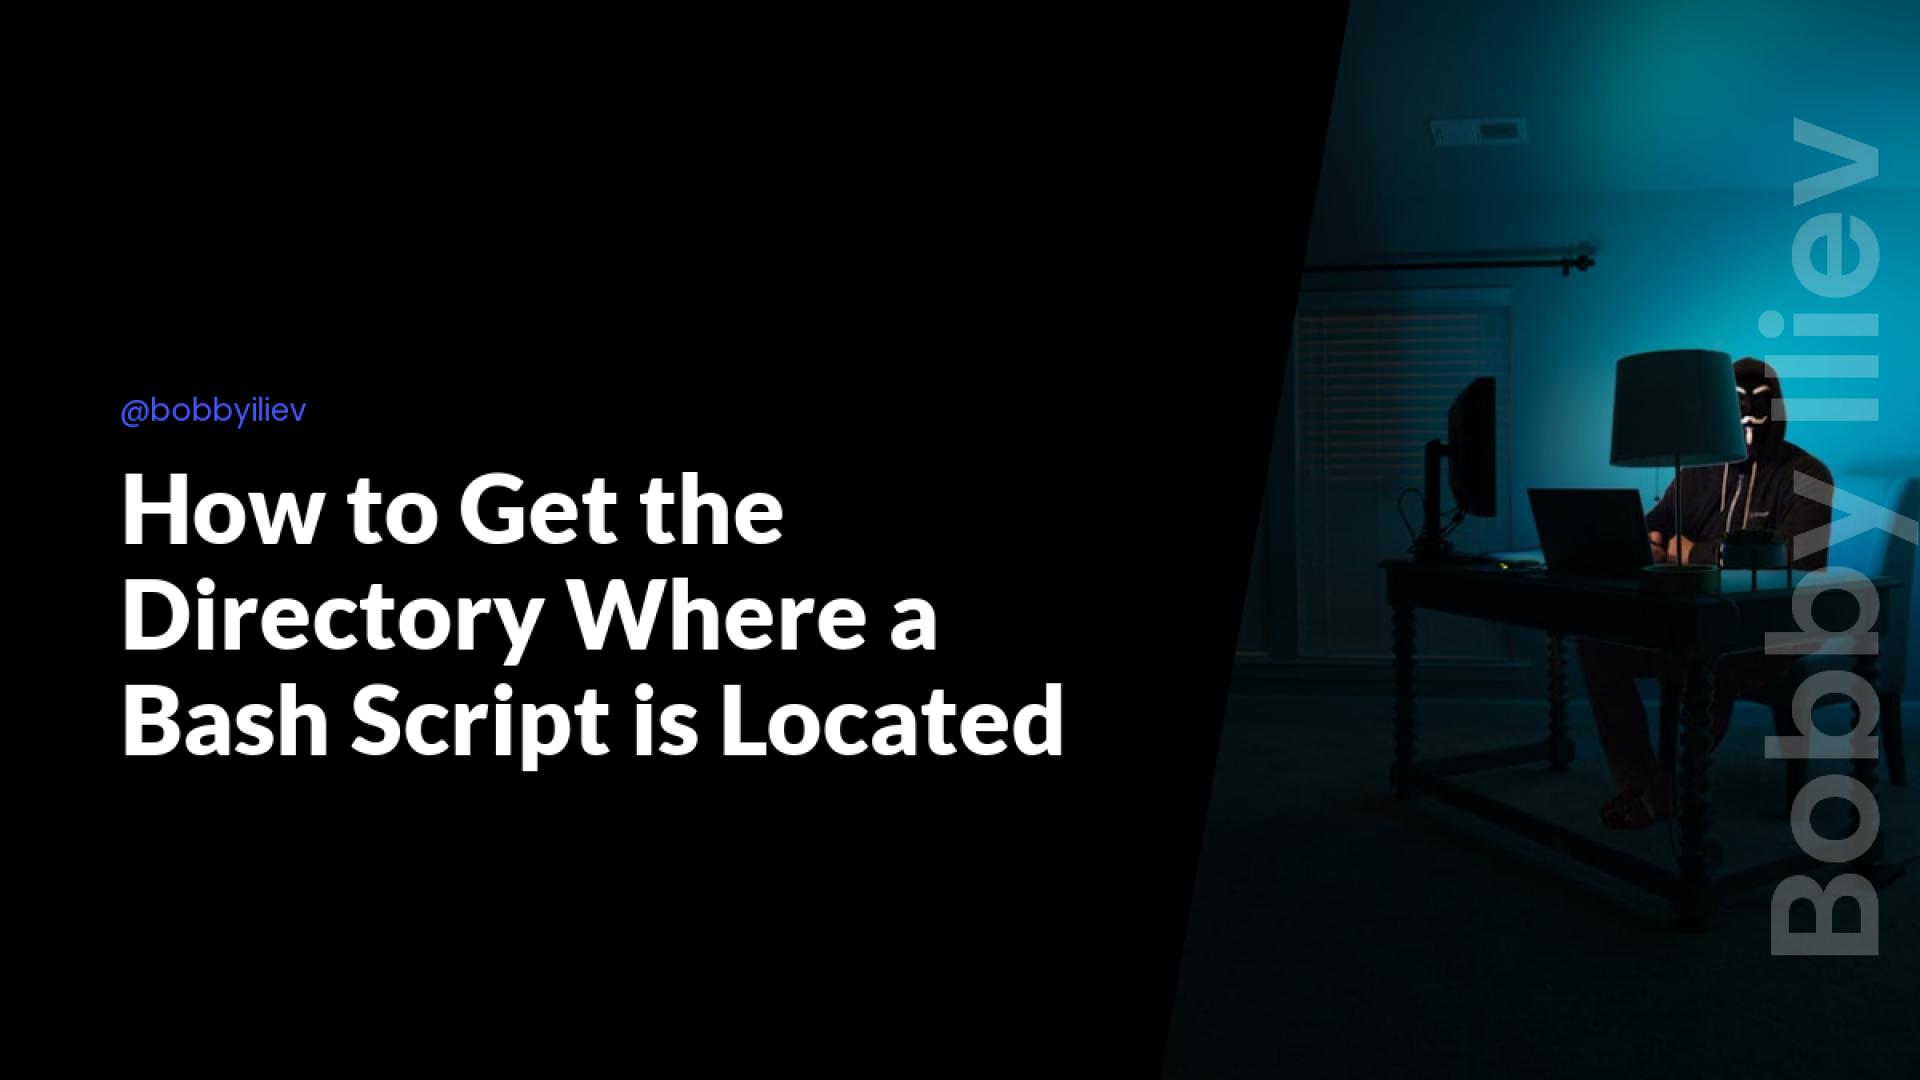 How to Get the Directory Where a Bash Script is Located